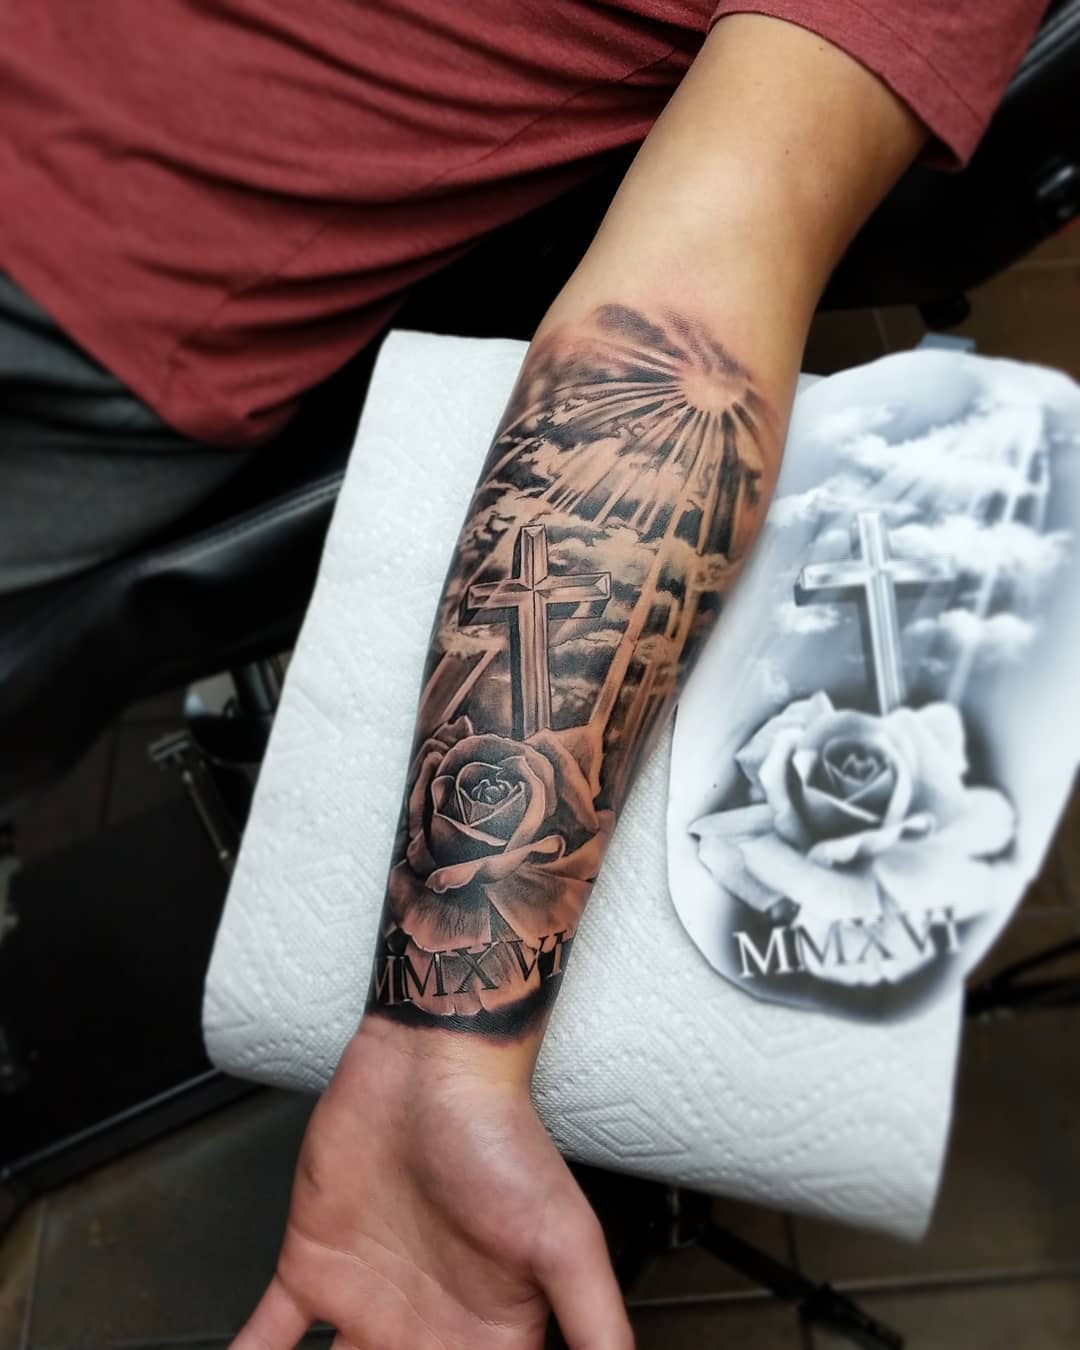 Top 10 Original Forearm RIP Tattoo Designs To Remain Your Sweet Memories